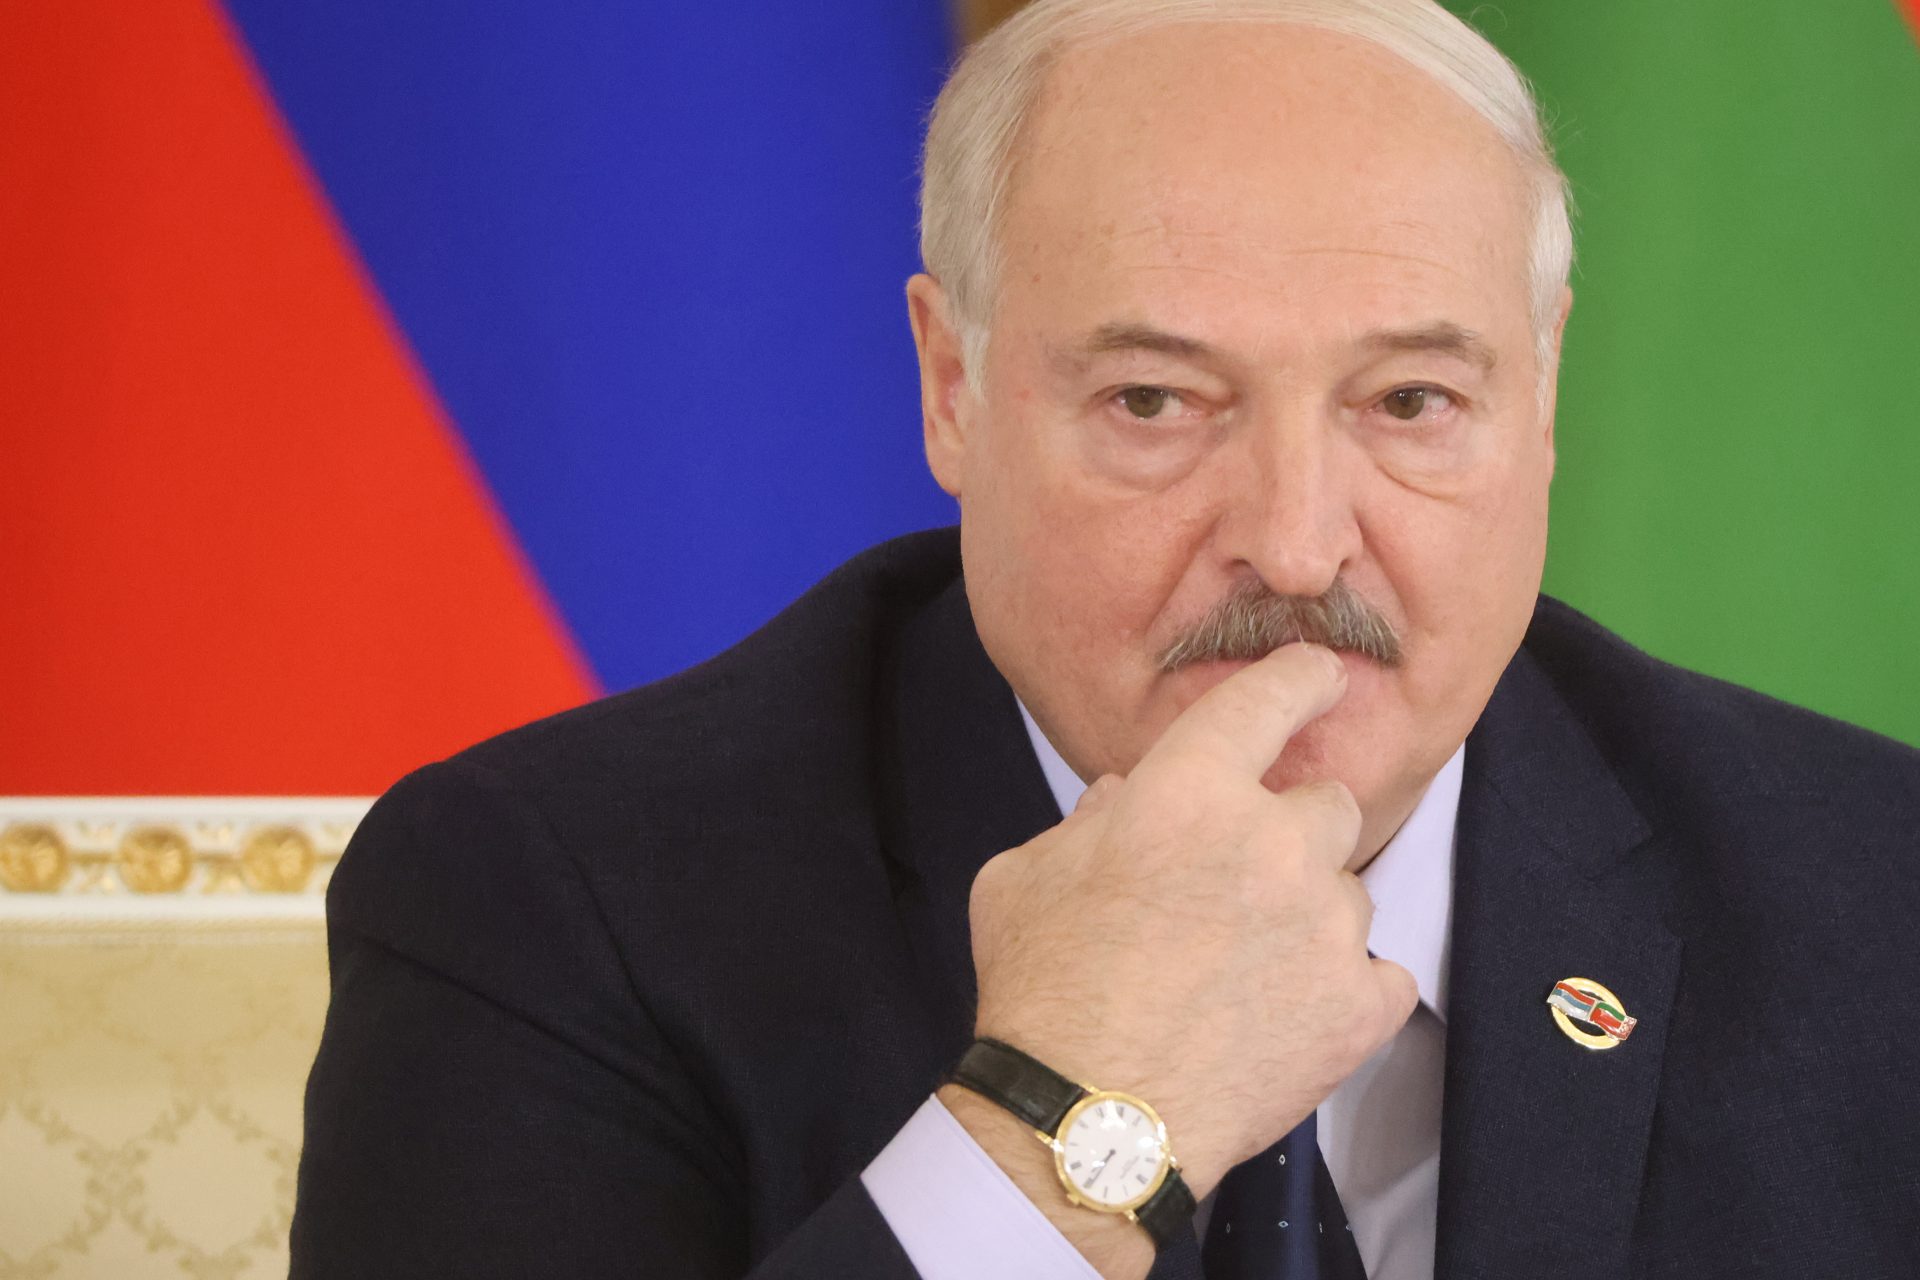 What do we know about Belarus' future?